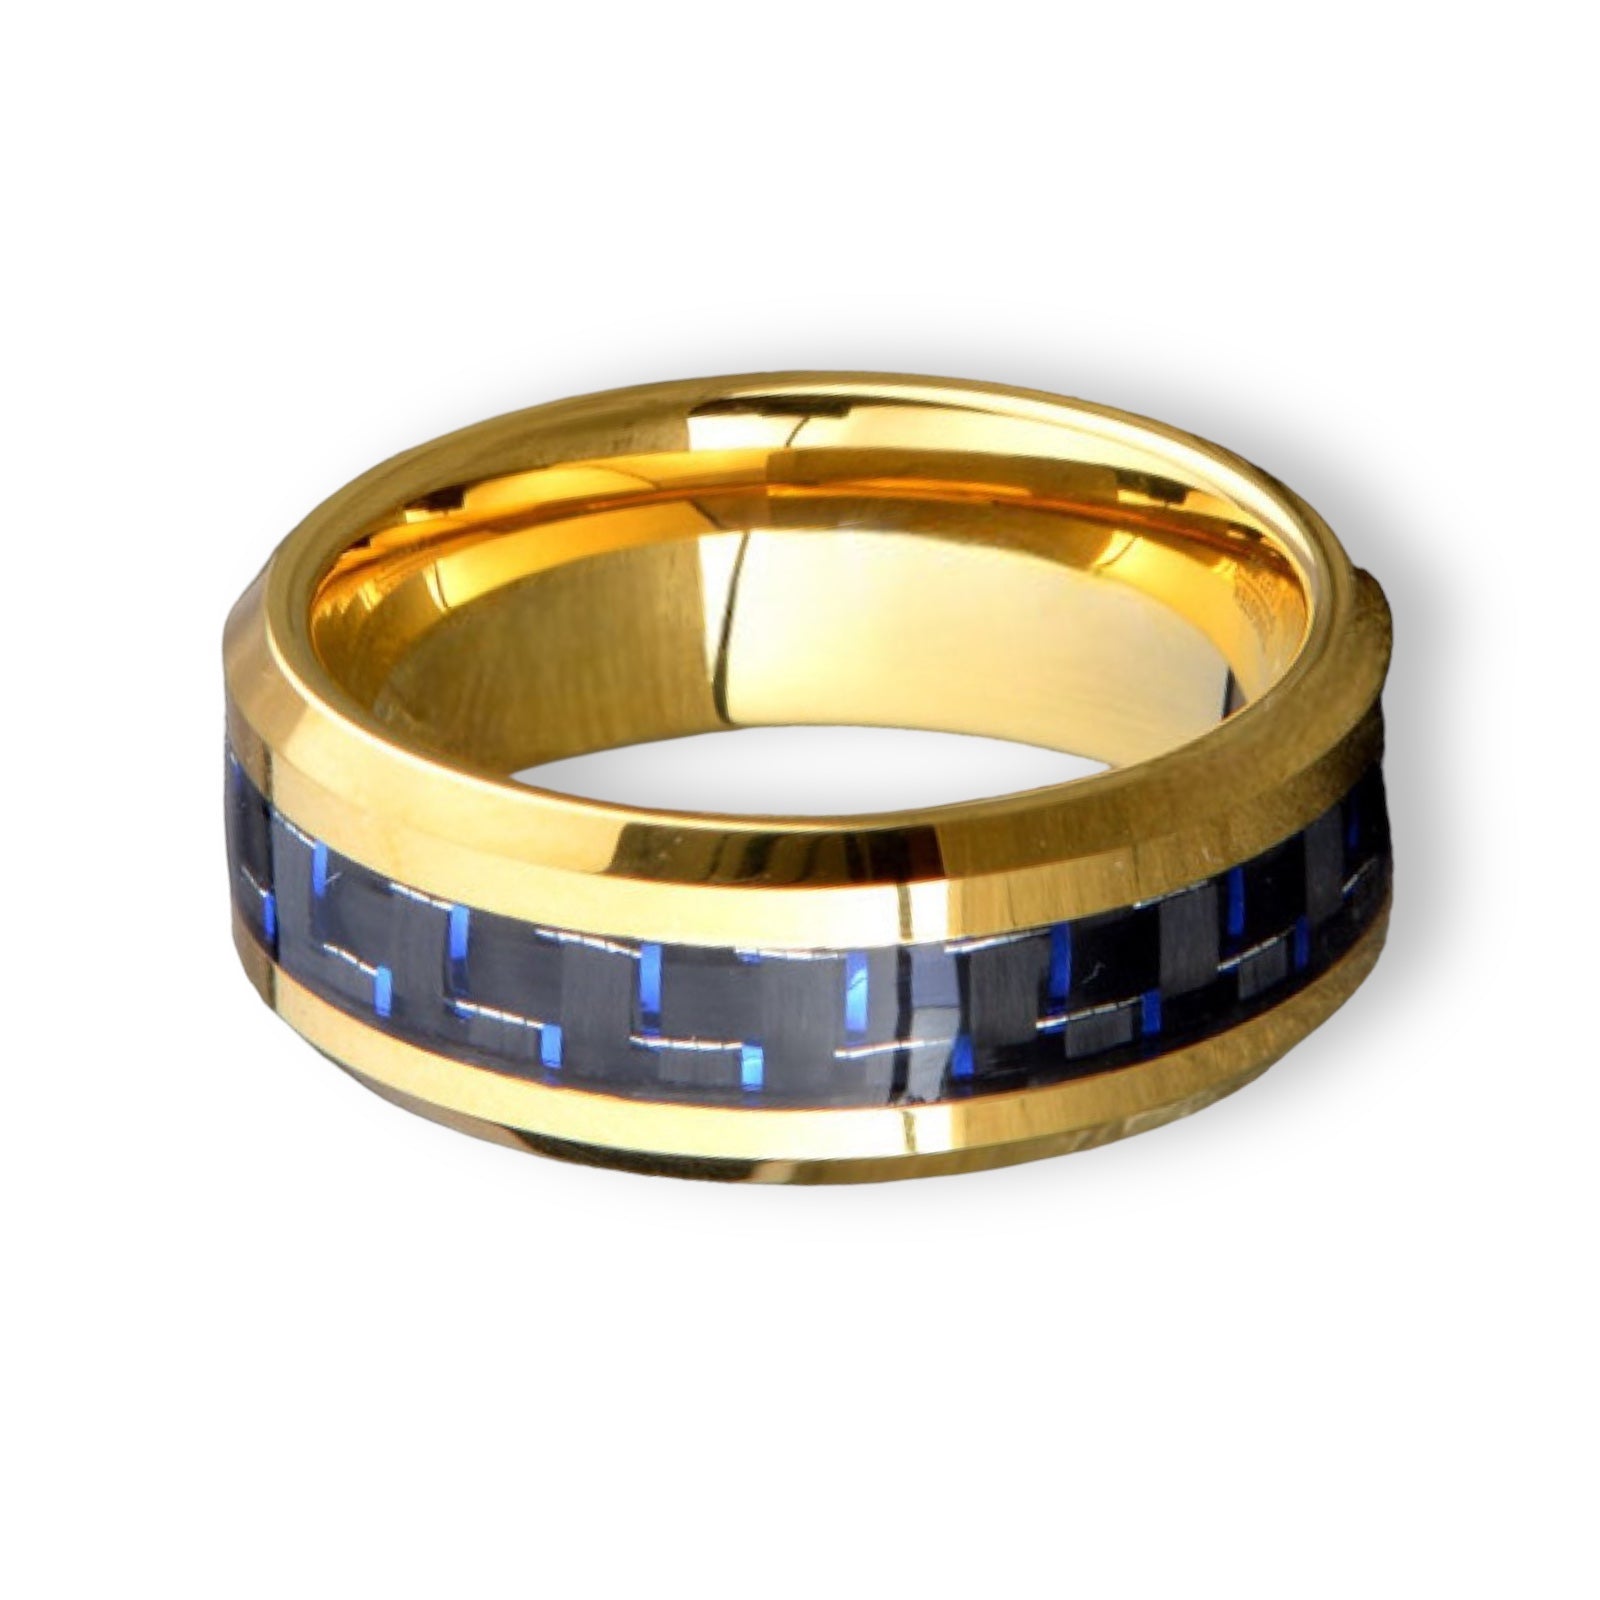 Tungsten Ring Yellow Gold Plated With Blue Carbon Fiber Inlay Beveled Edges Band